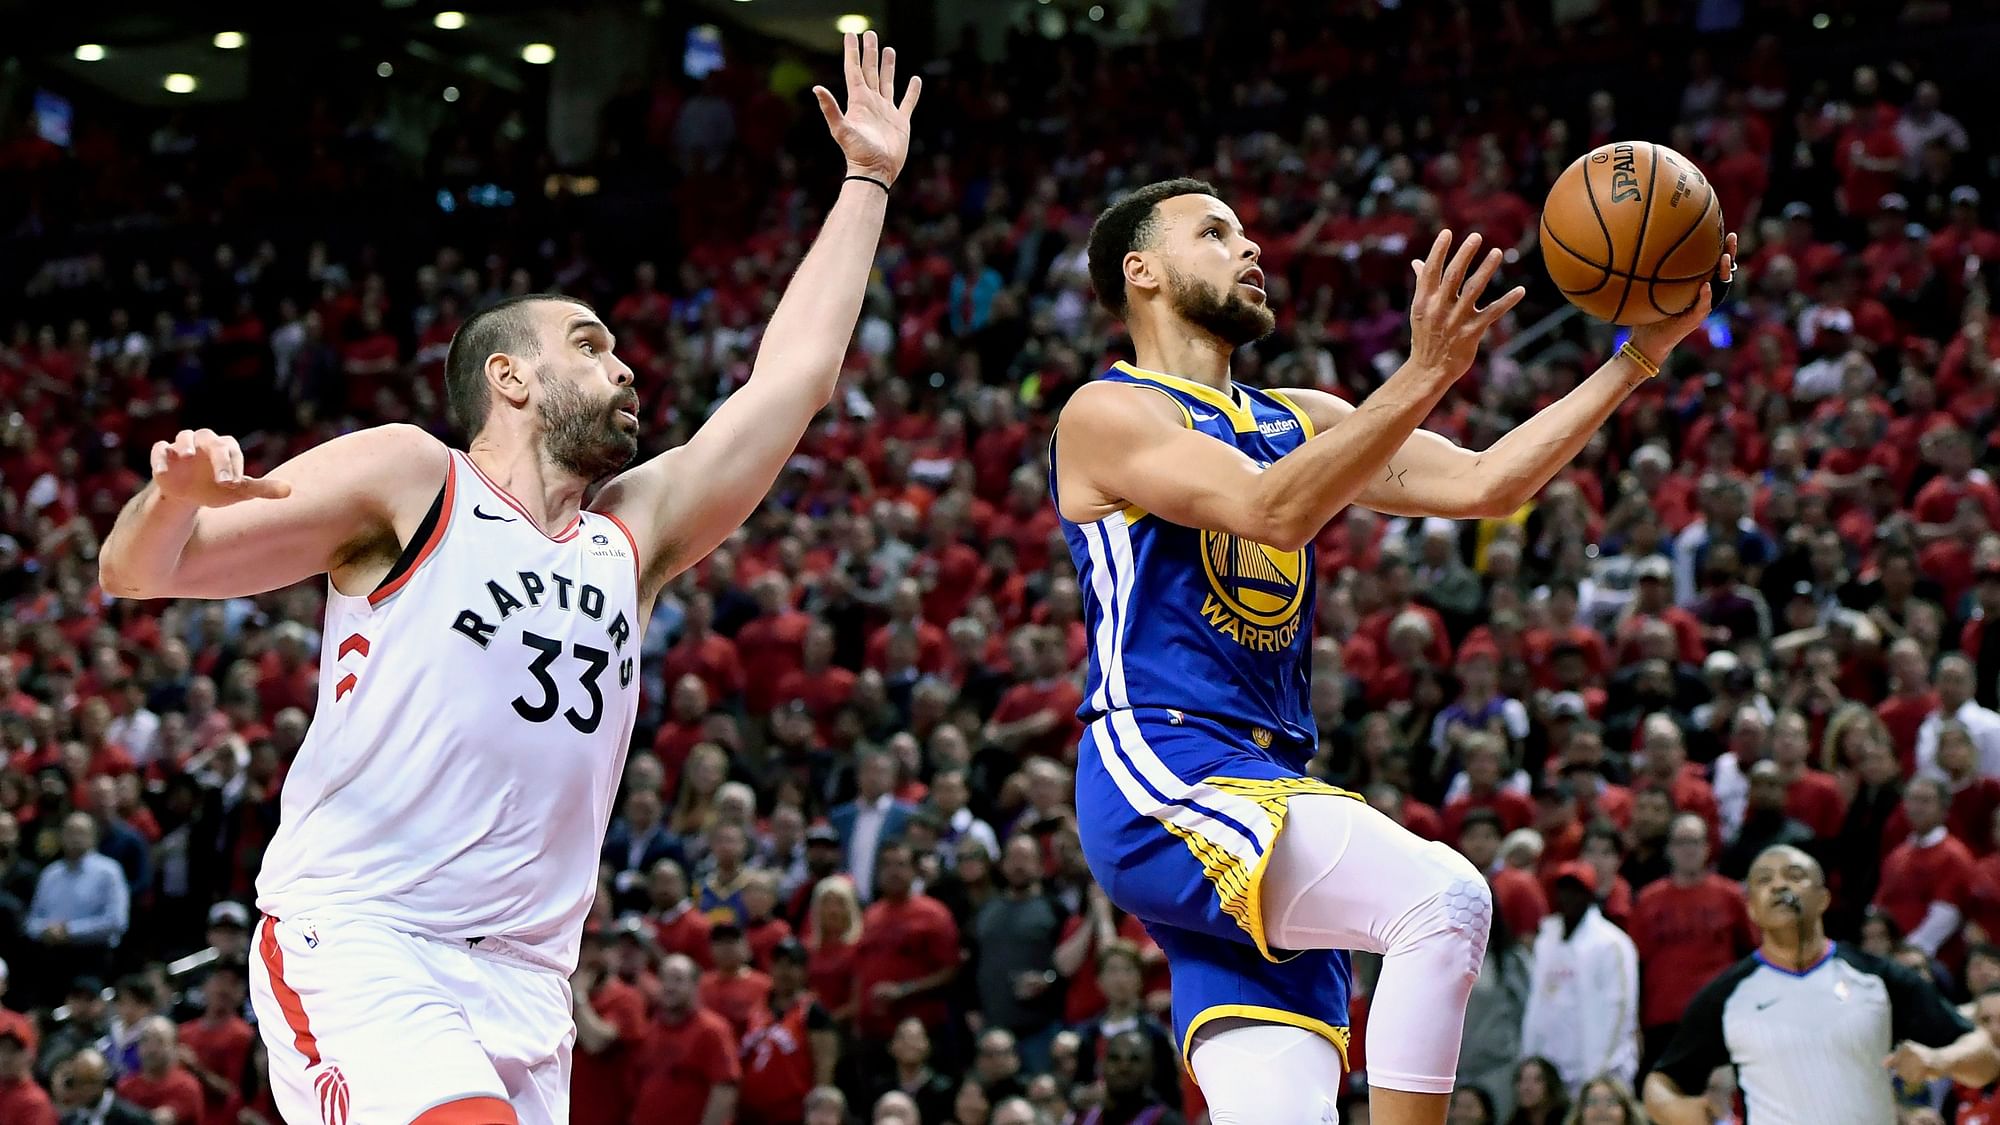 Golden State Warriors guard Stephen Curry (30) drives to the net as Toronto Raptors center Marc Gasol (33) looks on during the NBA Finals.